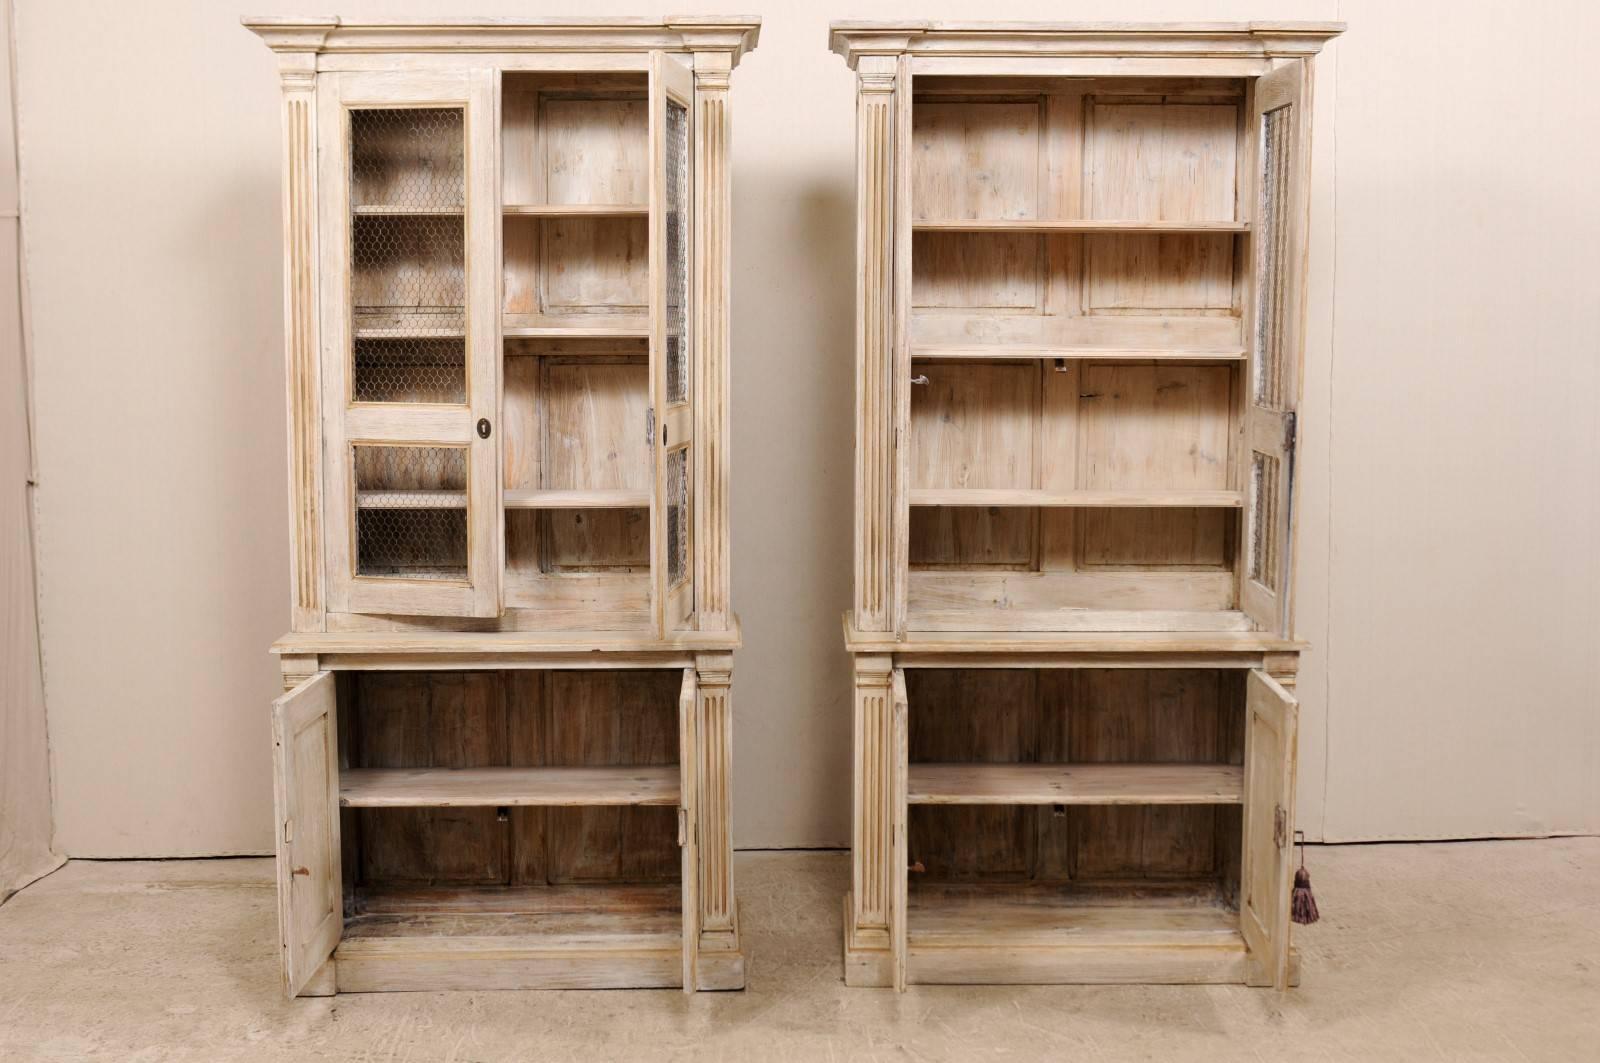 Pair of 19th Century Tall Painted Wood Cabinets with Wire on the Cabinet Doors 1